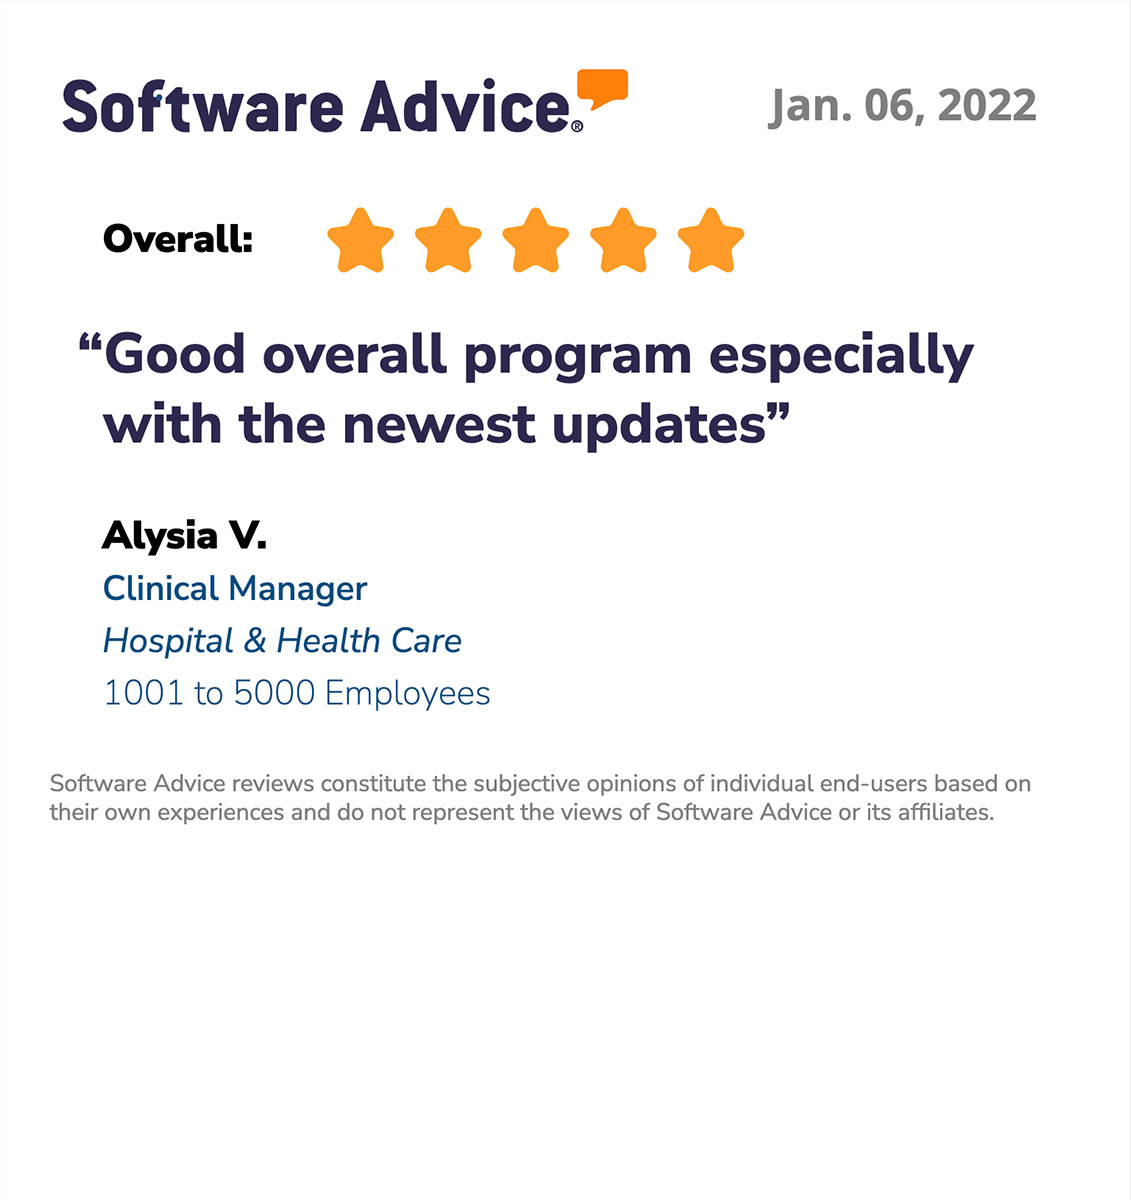 Software Advice review for eClinicalWorks EMR: Overall 5 stars, Good overall program especially with the newest updates